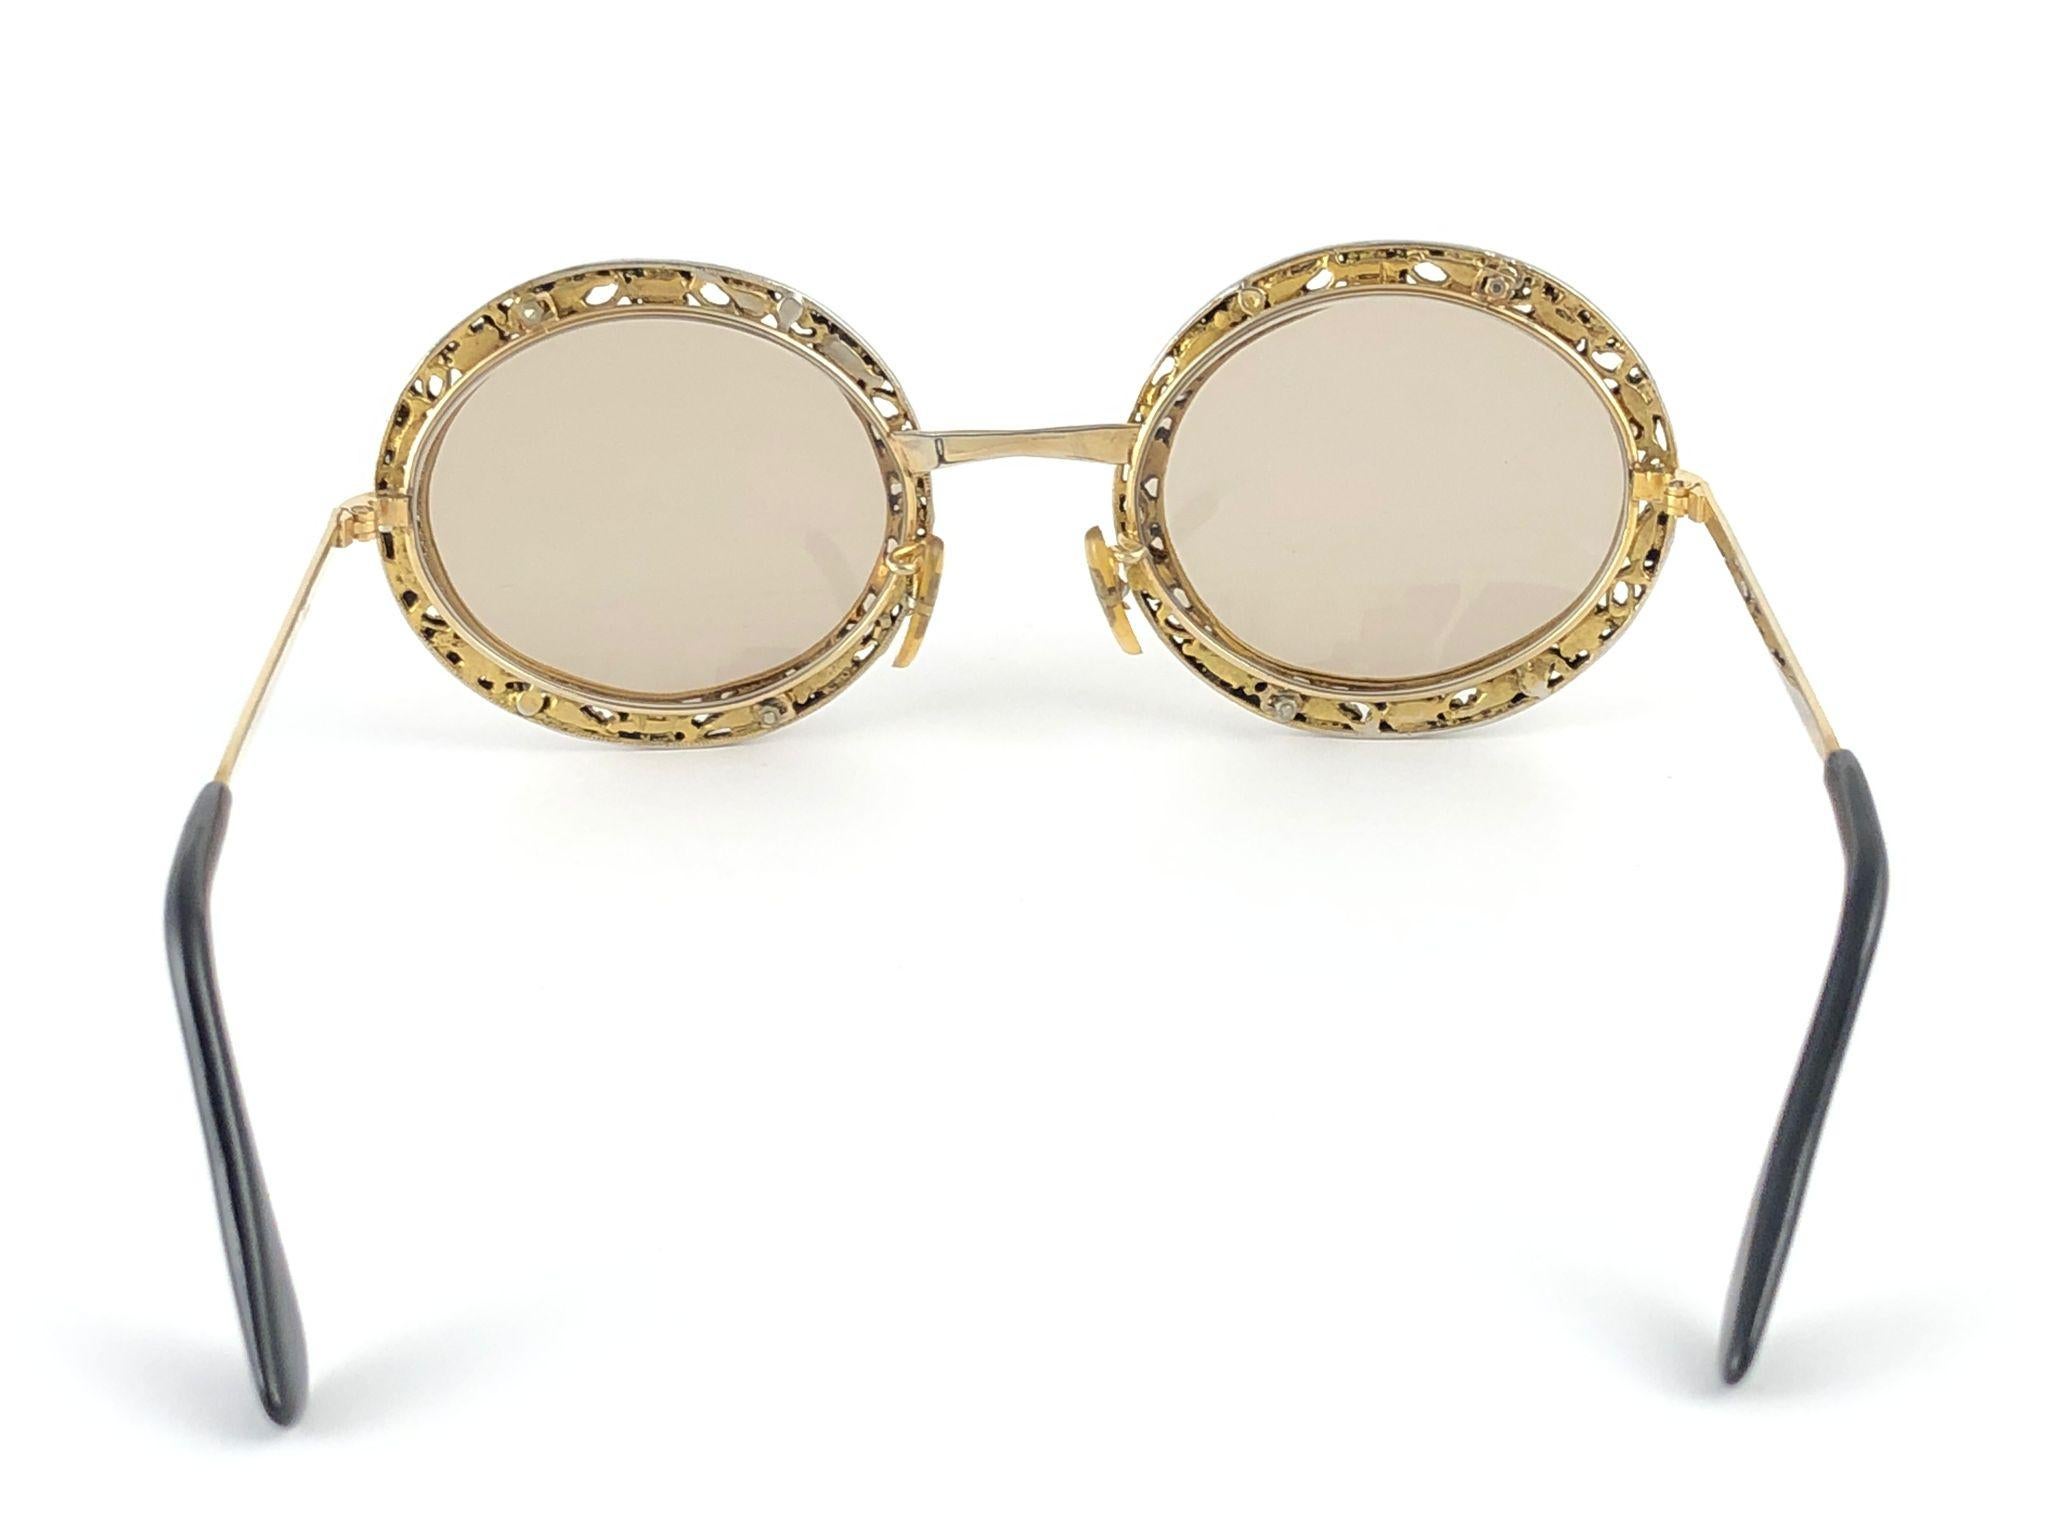 Ultra Rare 1960 Tura Jewelled Opal Accented Frame Archive Dior Sunglasses For Sale 1